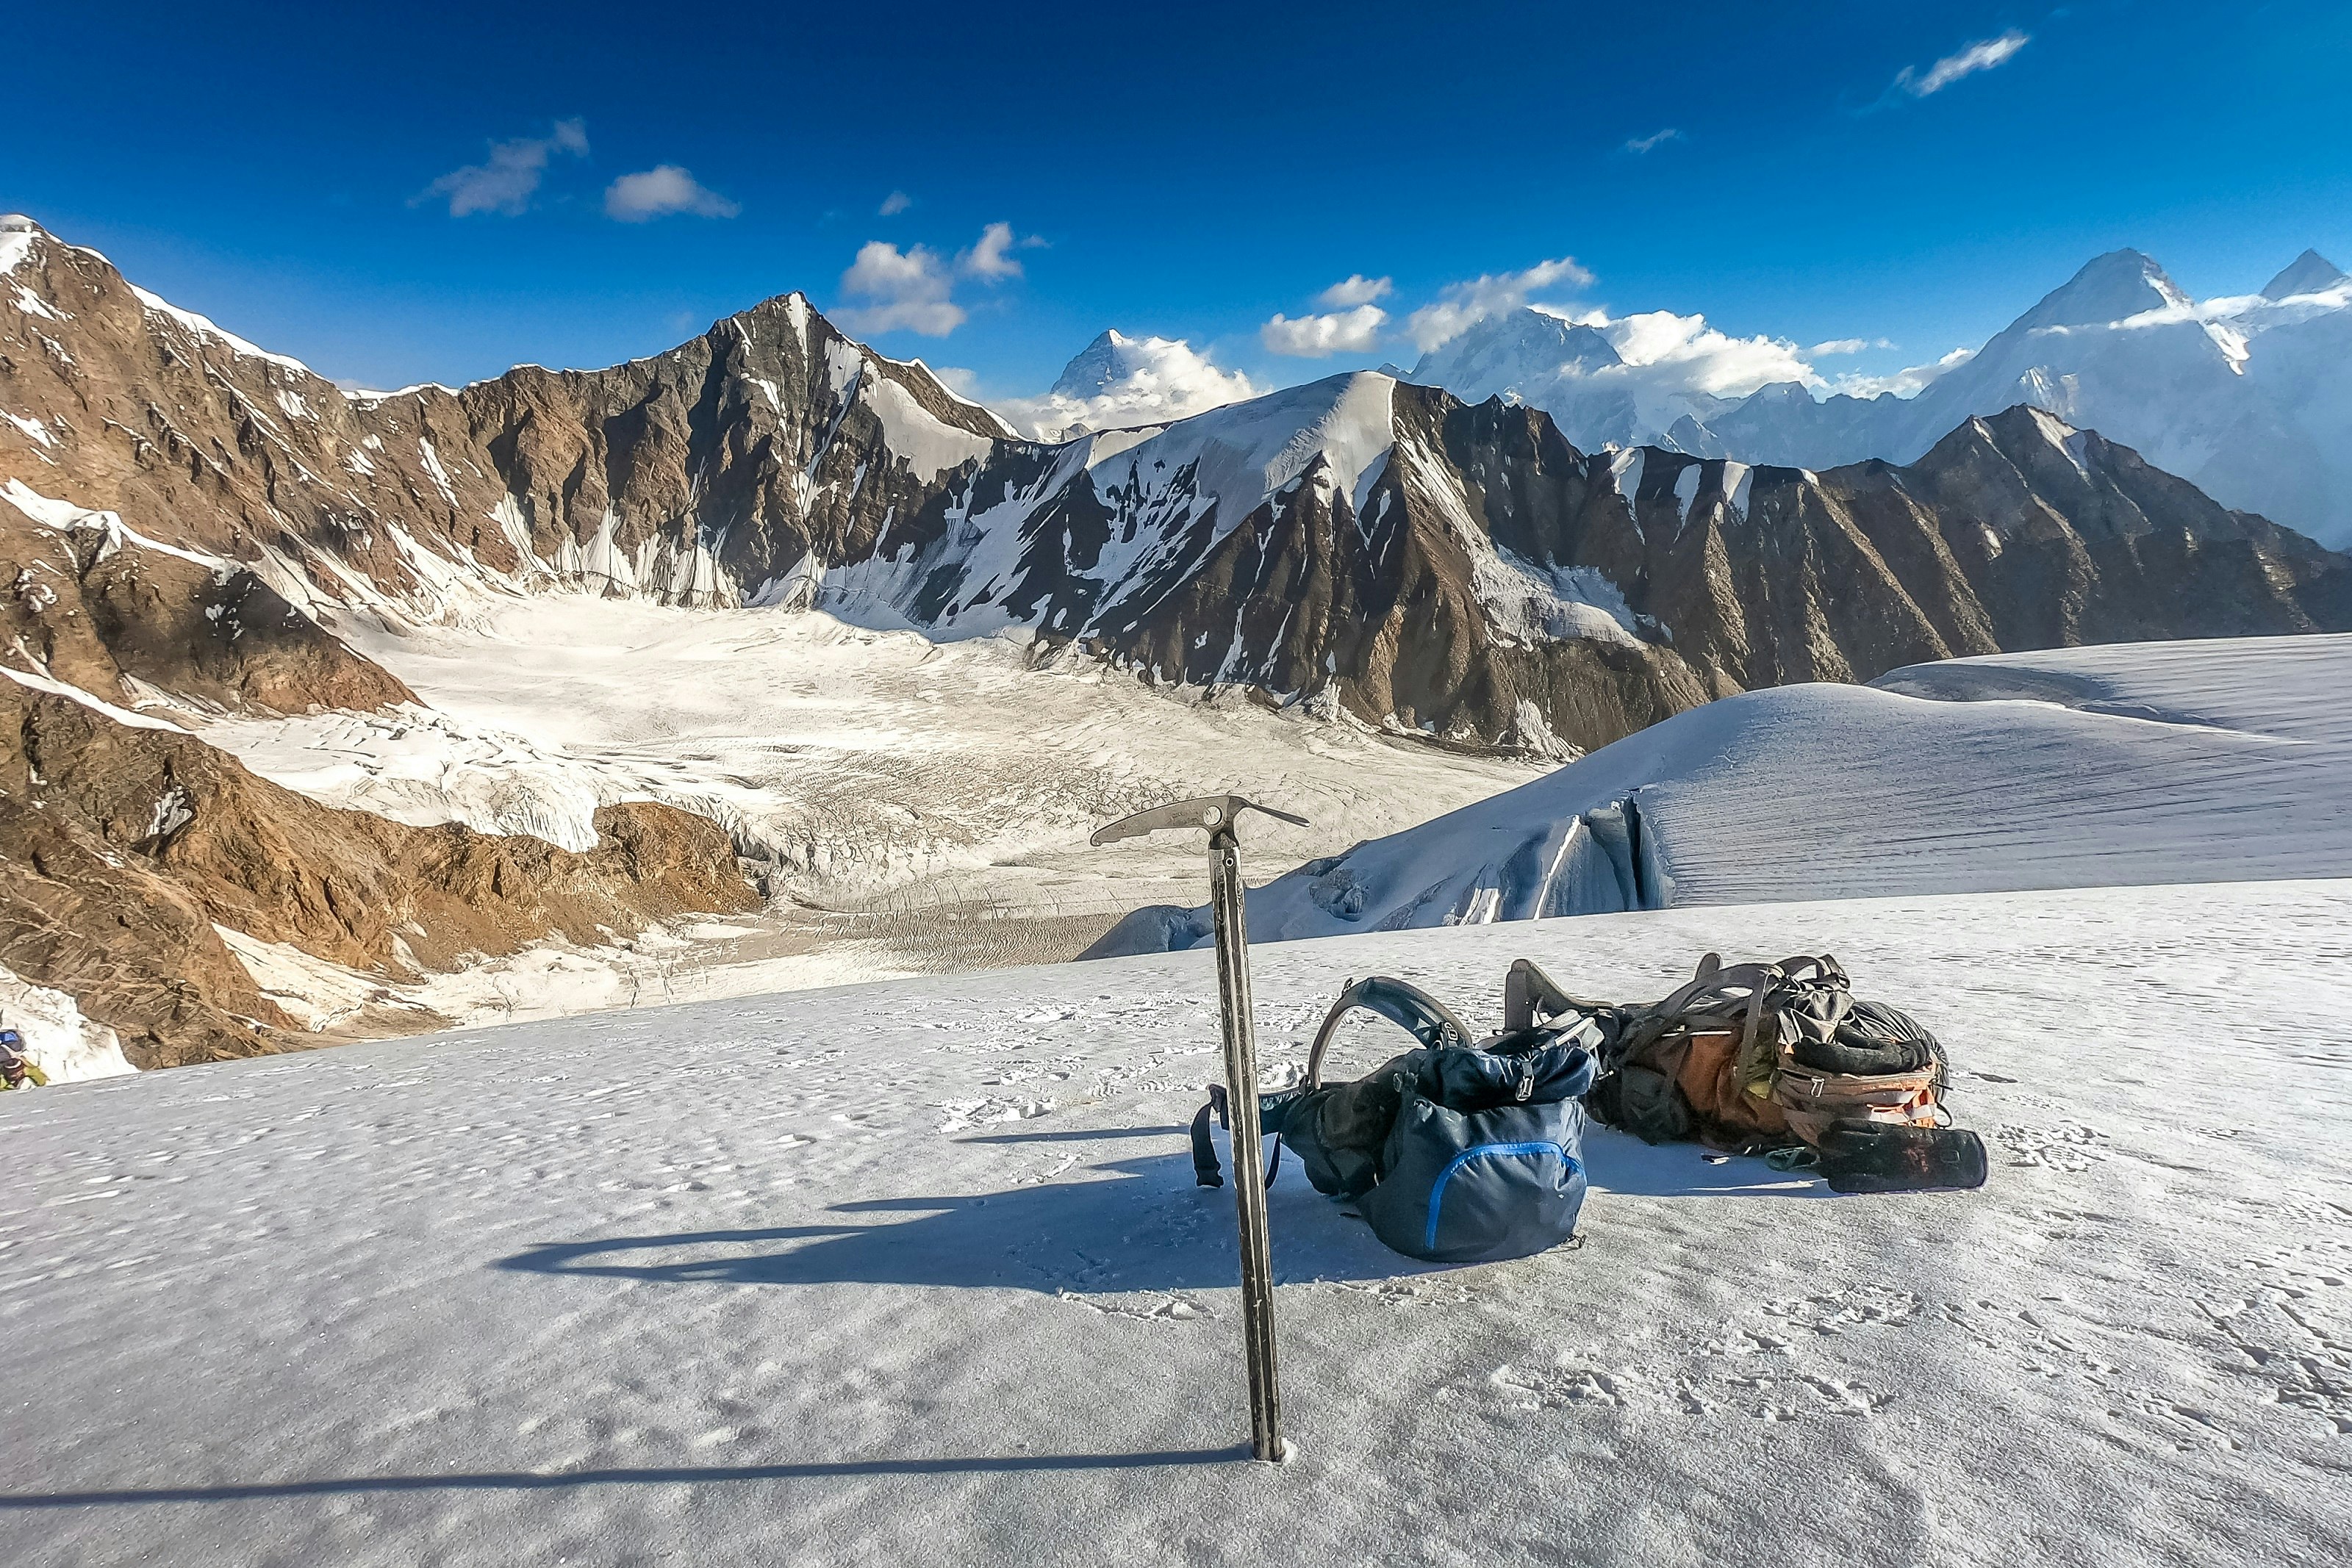 An ice pick is jammed into the ice on the Gondogoro La pass, next to which, two trekking backpacks lie on the ice. In the background, several rocky summits are visible.